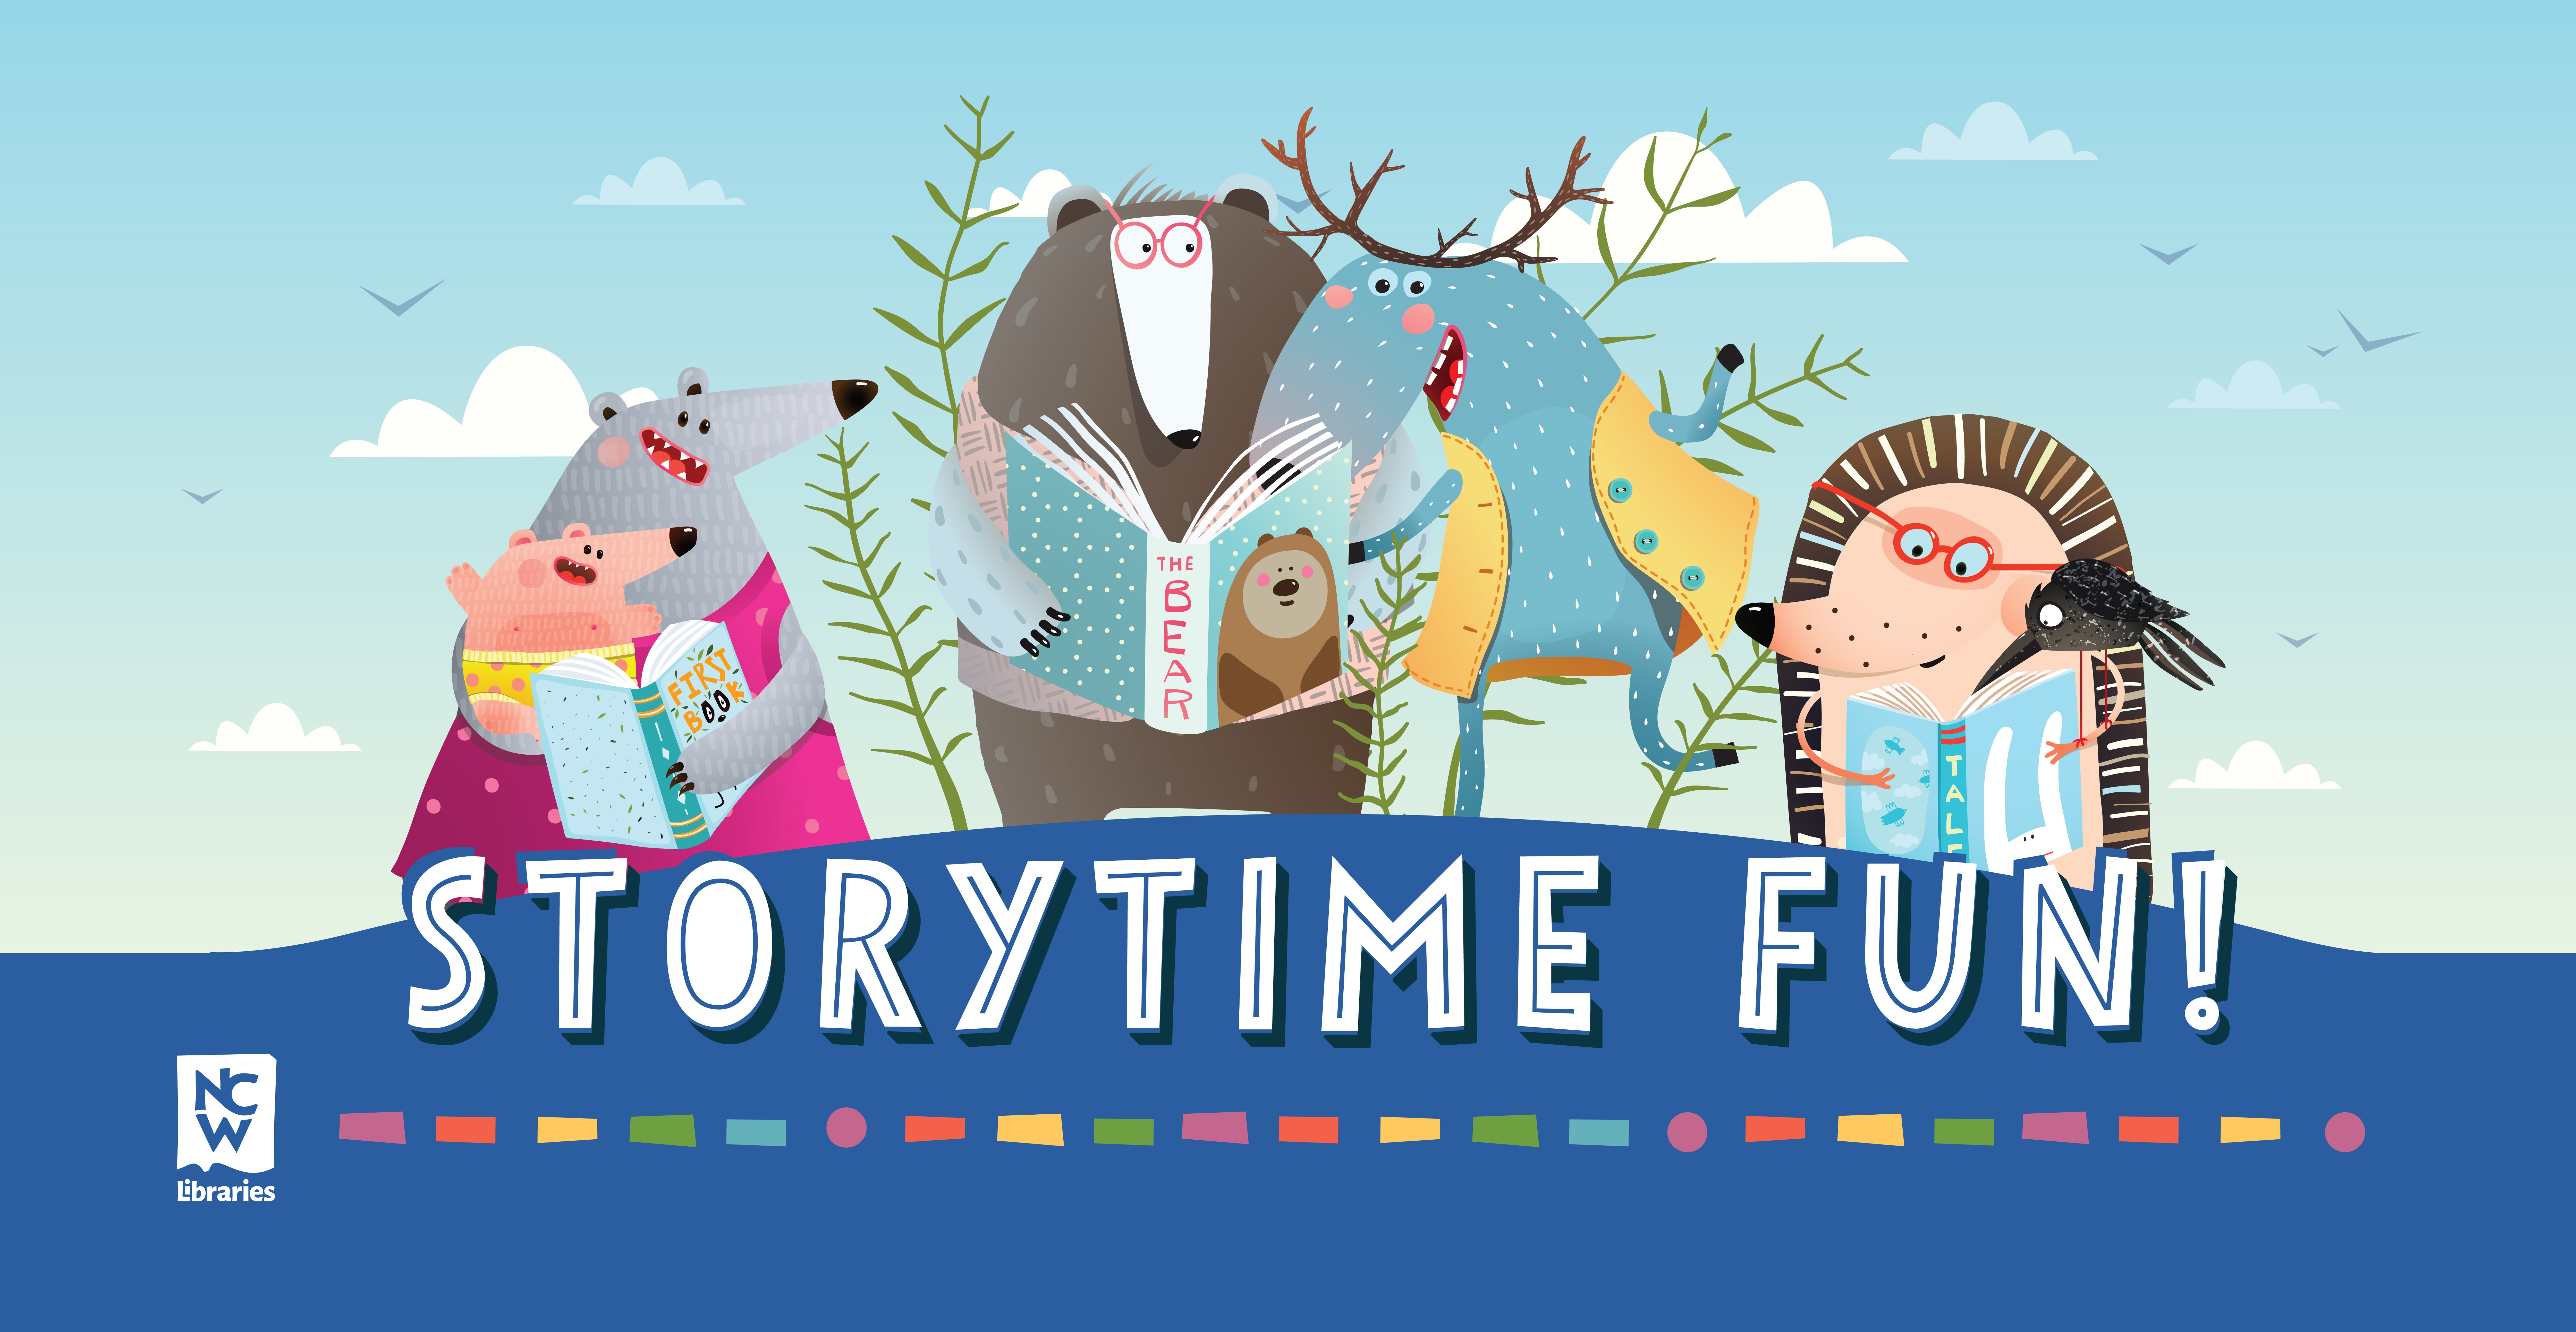 Join us each week for storytime fun!